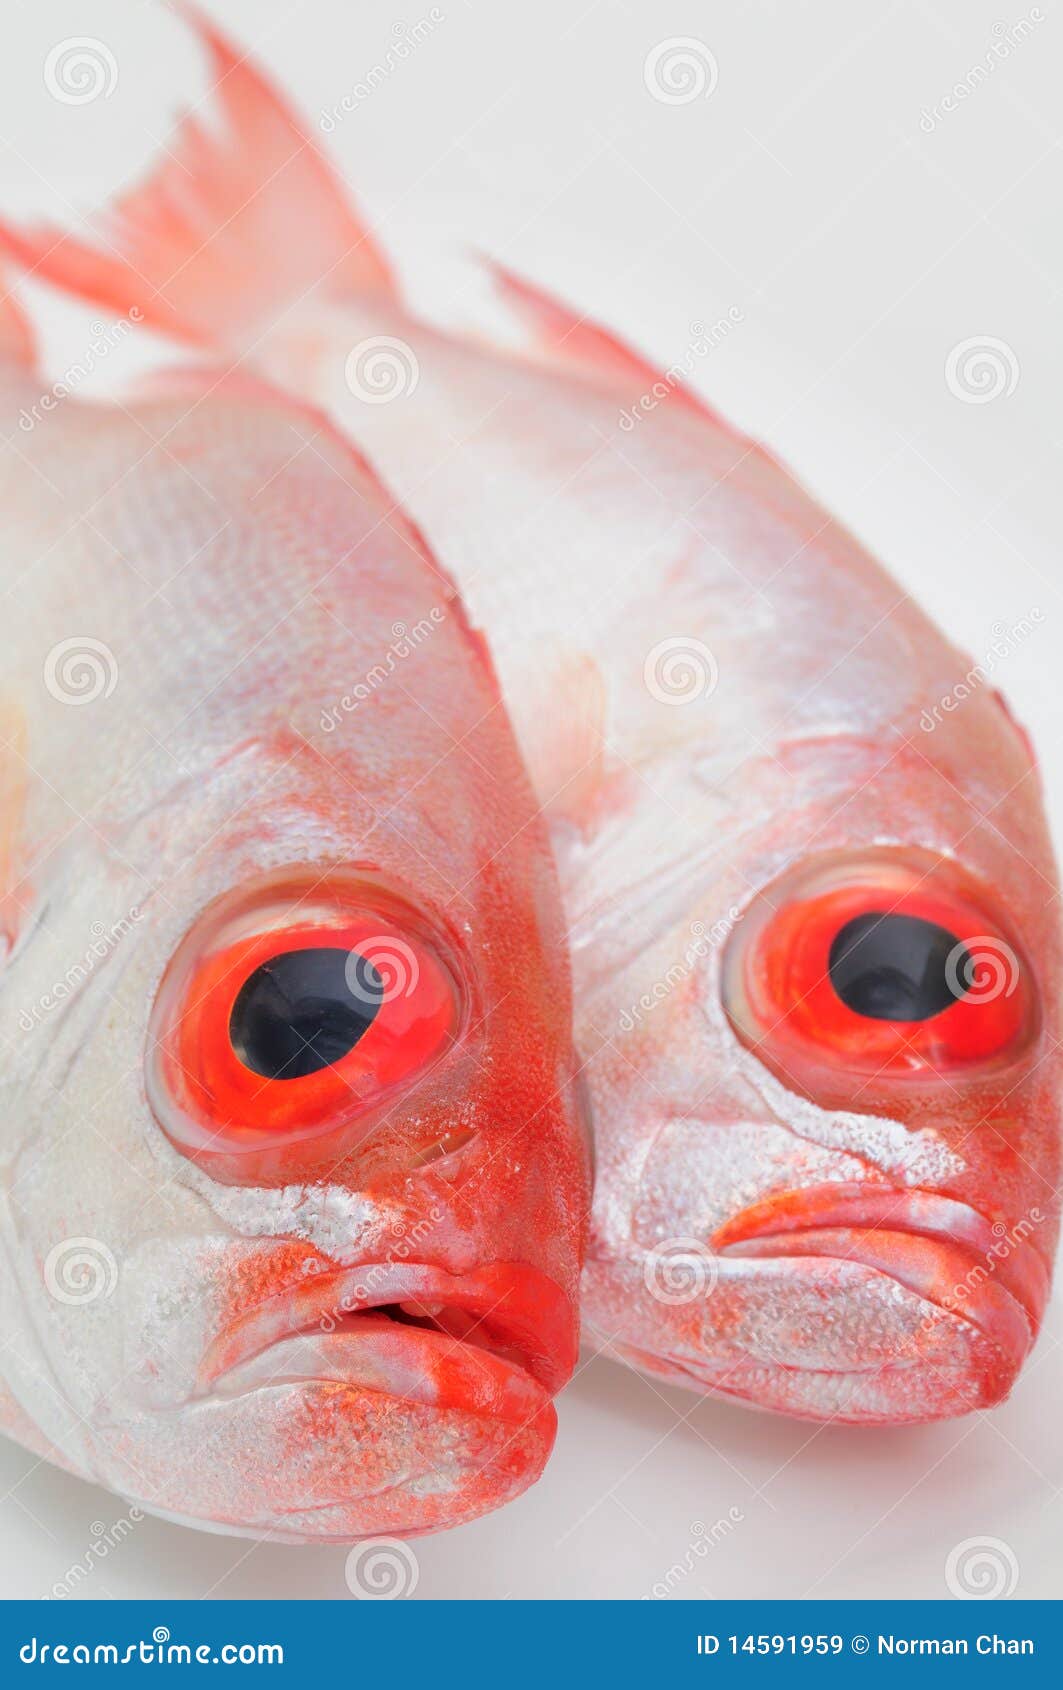 Sniper Fish Stock Photos - Free & Royalty-Free Stock Photos from Dreamstime